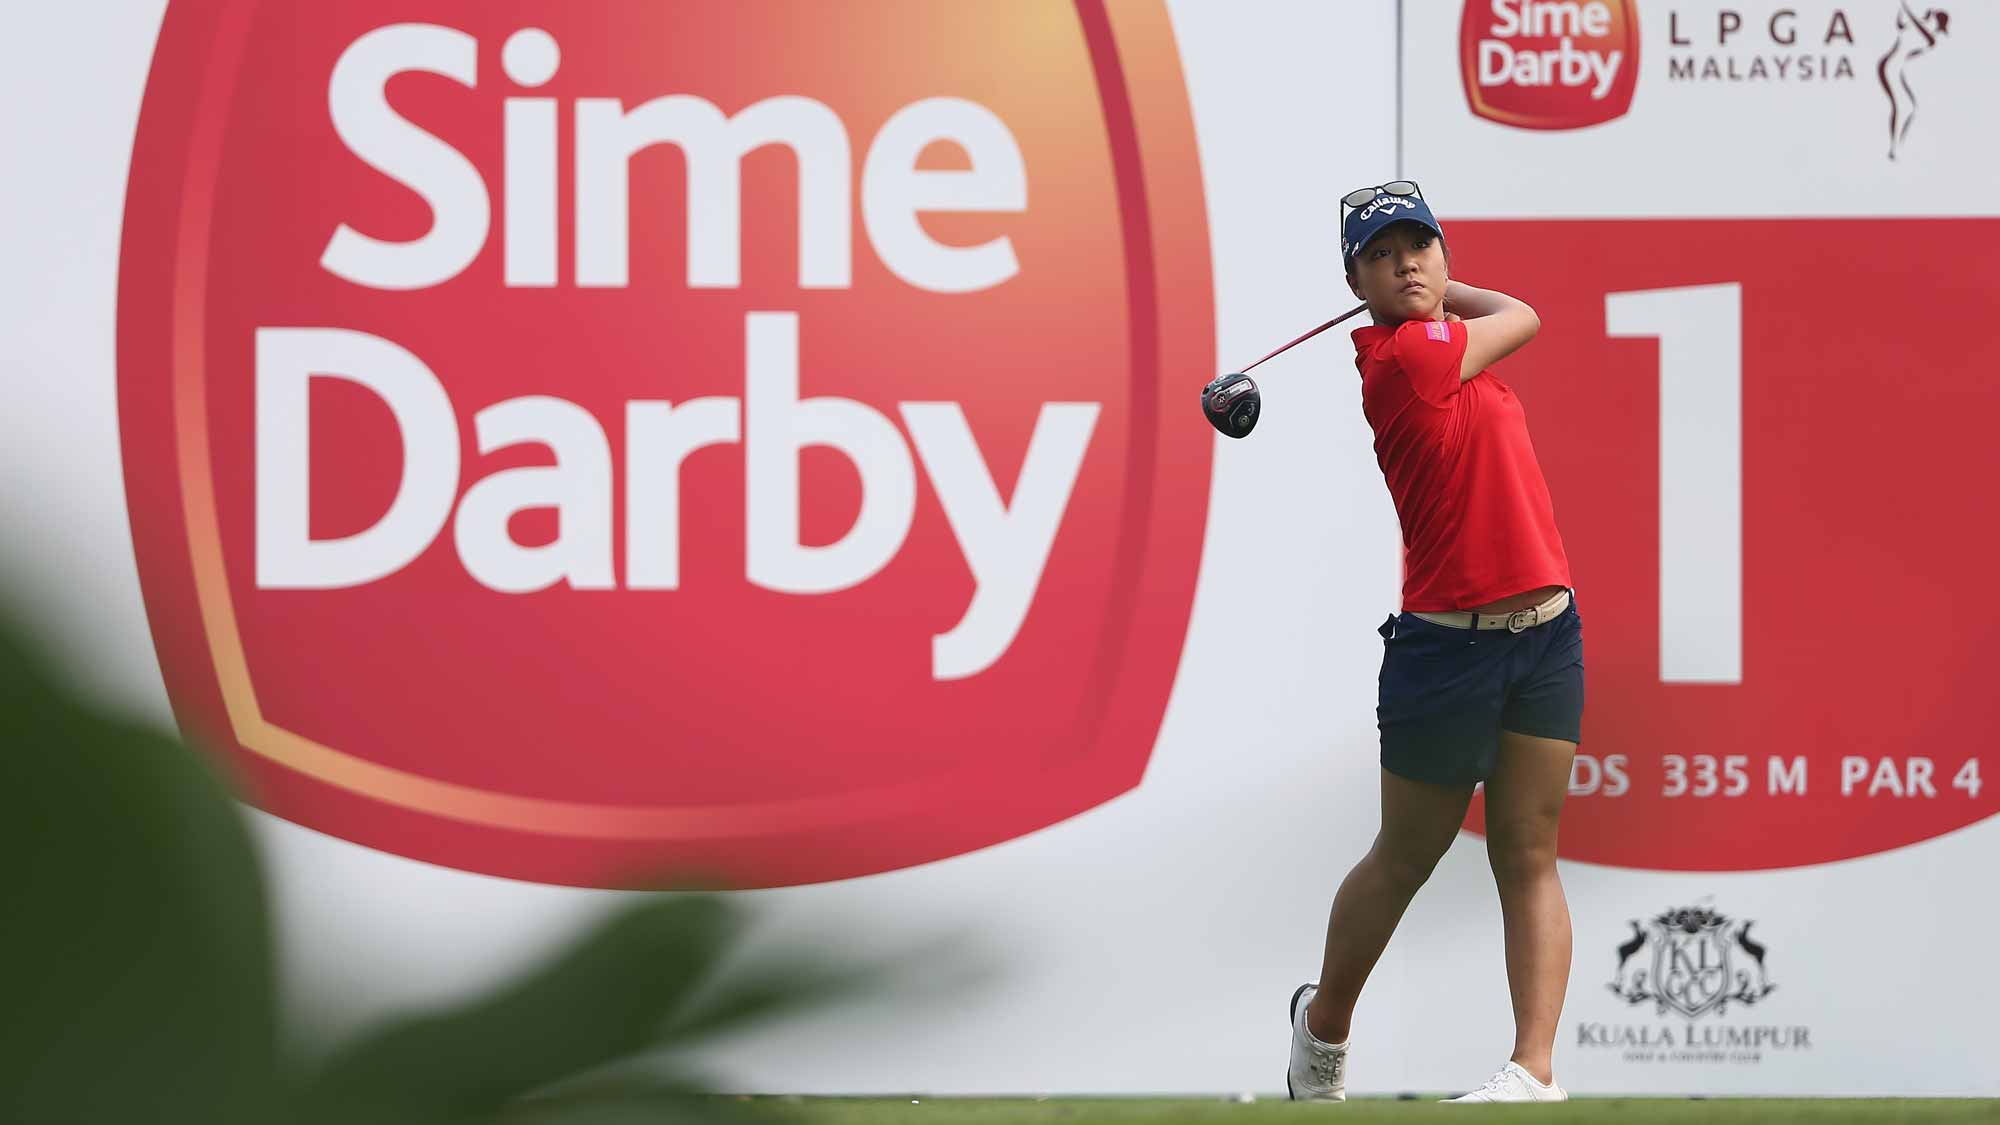 Lydia Ko of New Zealand watches her tee shot on the 1st hole during the final round of the Sime Darby LPGA Tour at Kuala Lumpur Golf & Country Club